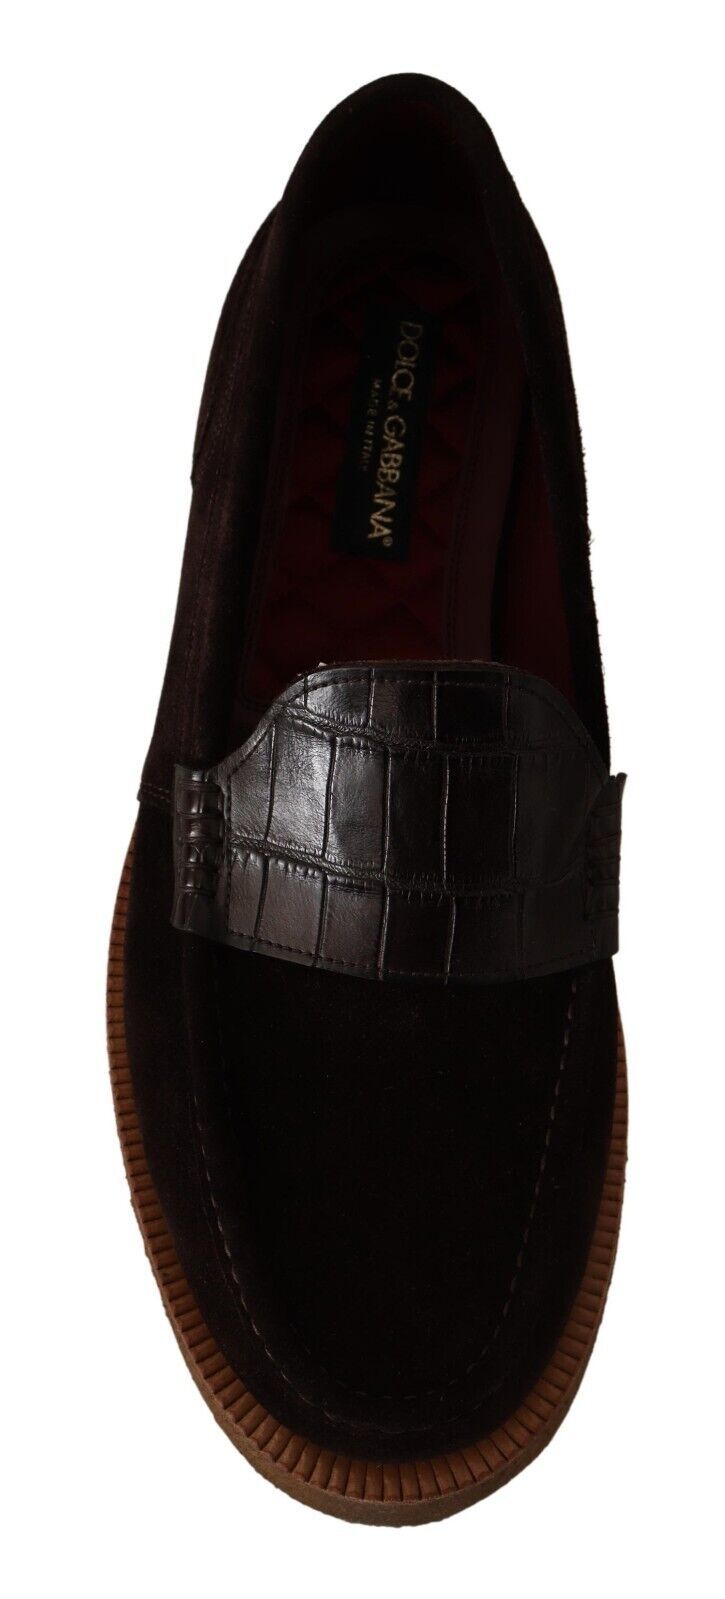 Dolce & Gabbana Brown Suede Leather Slip On Flats Moccasin Shoes - Gio Beverly Hills